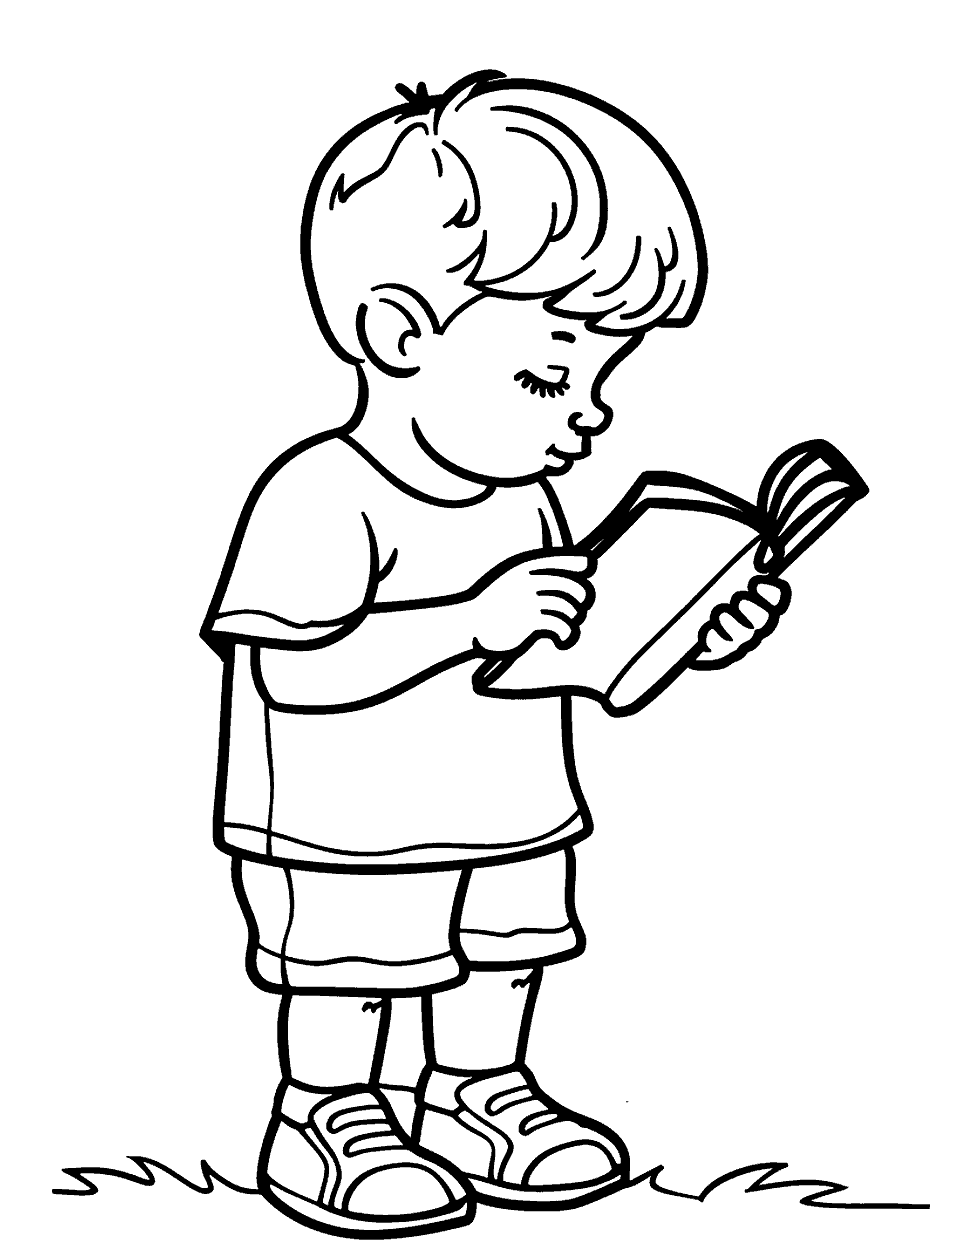 Quiet Reader Coloring Page - A child reading a book quitely.